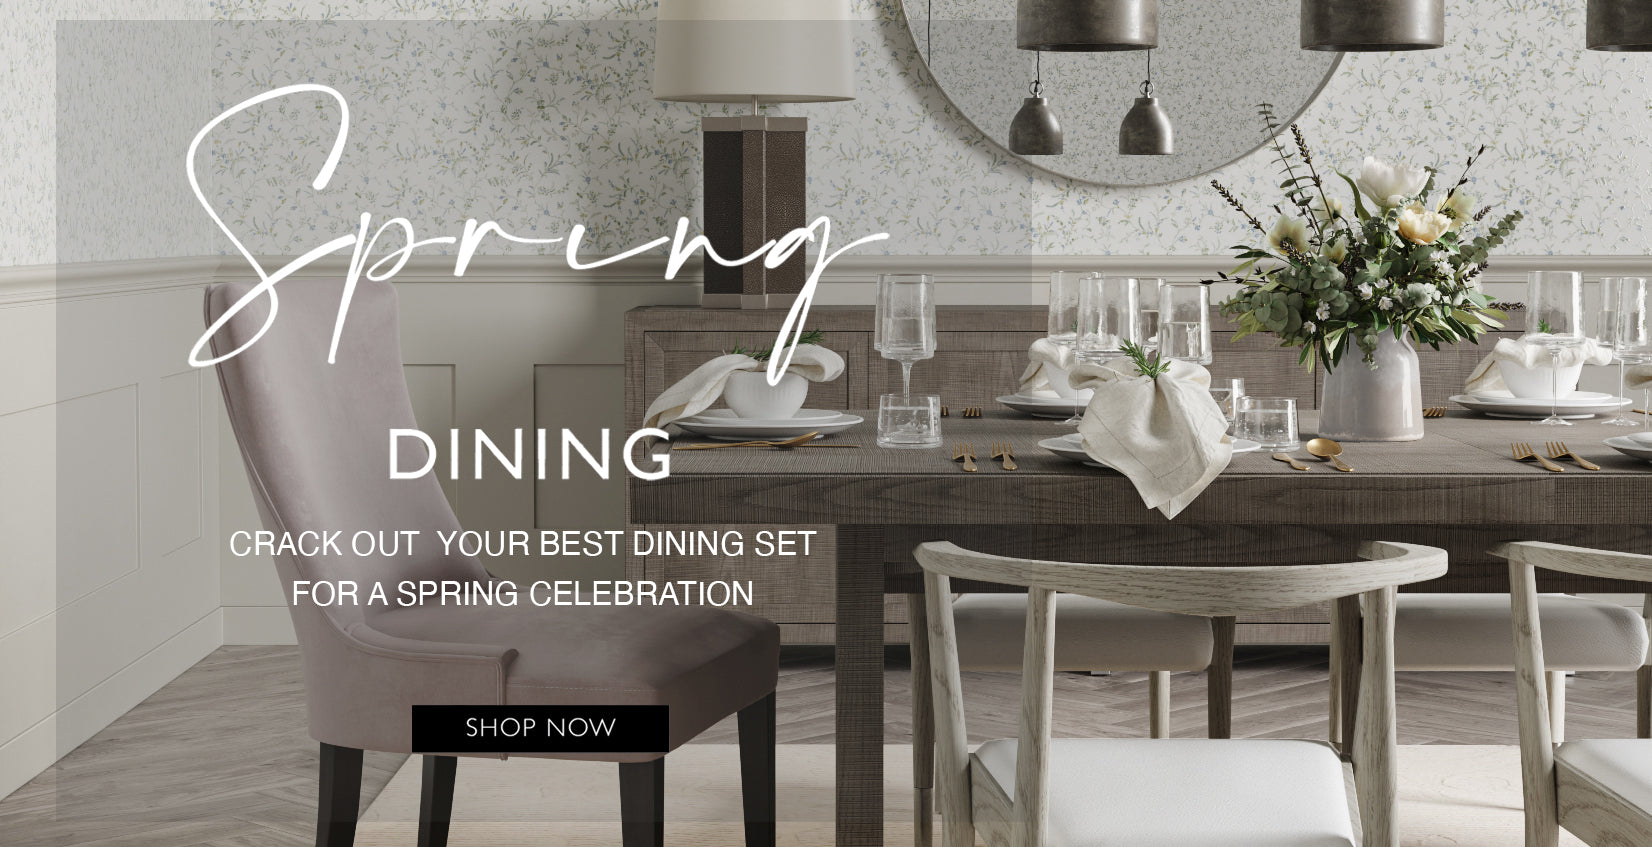 Stylish dining room setup from Sonder Living's collection, featuring modern furniture and elegant design elements.